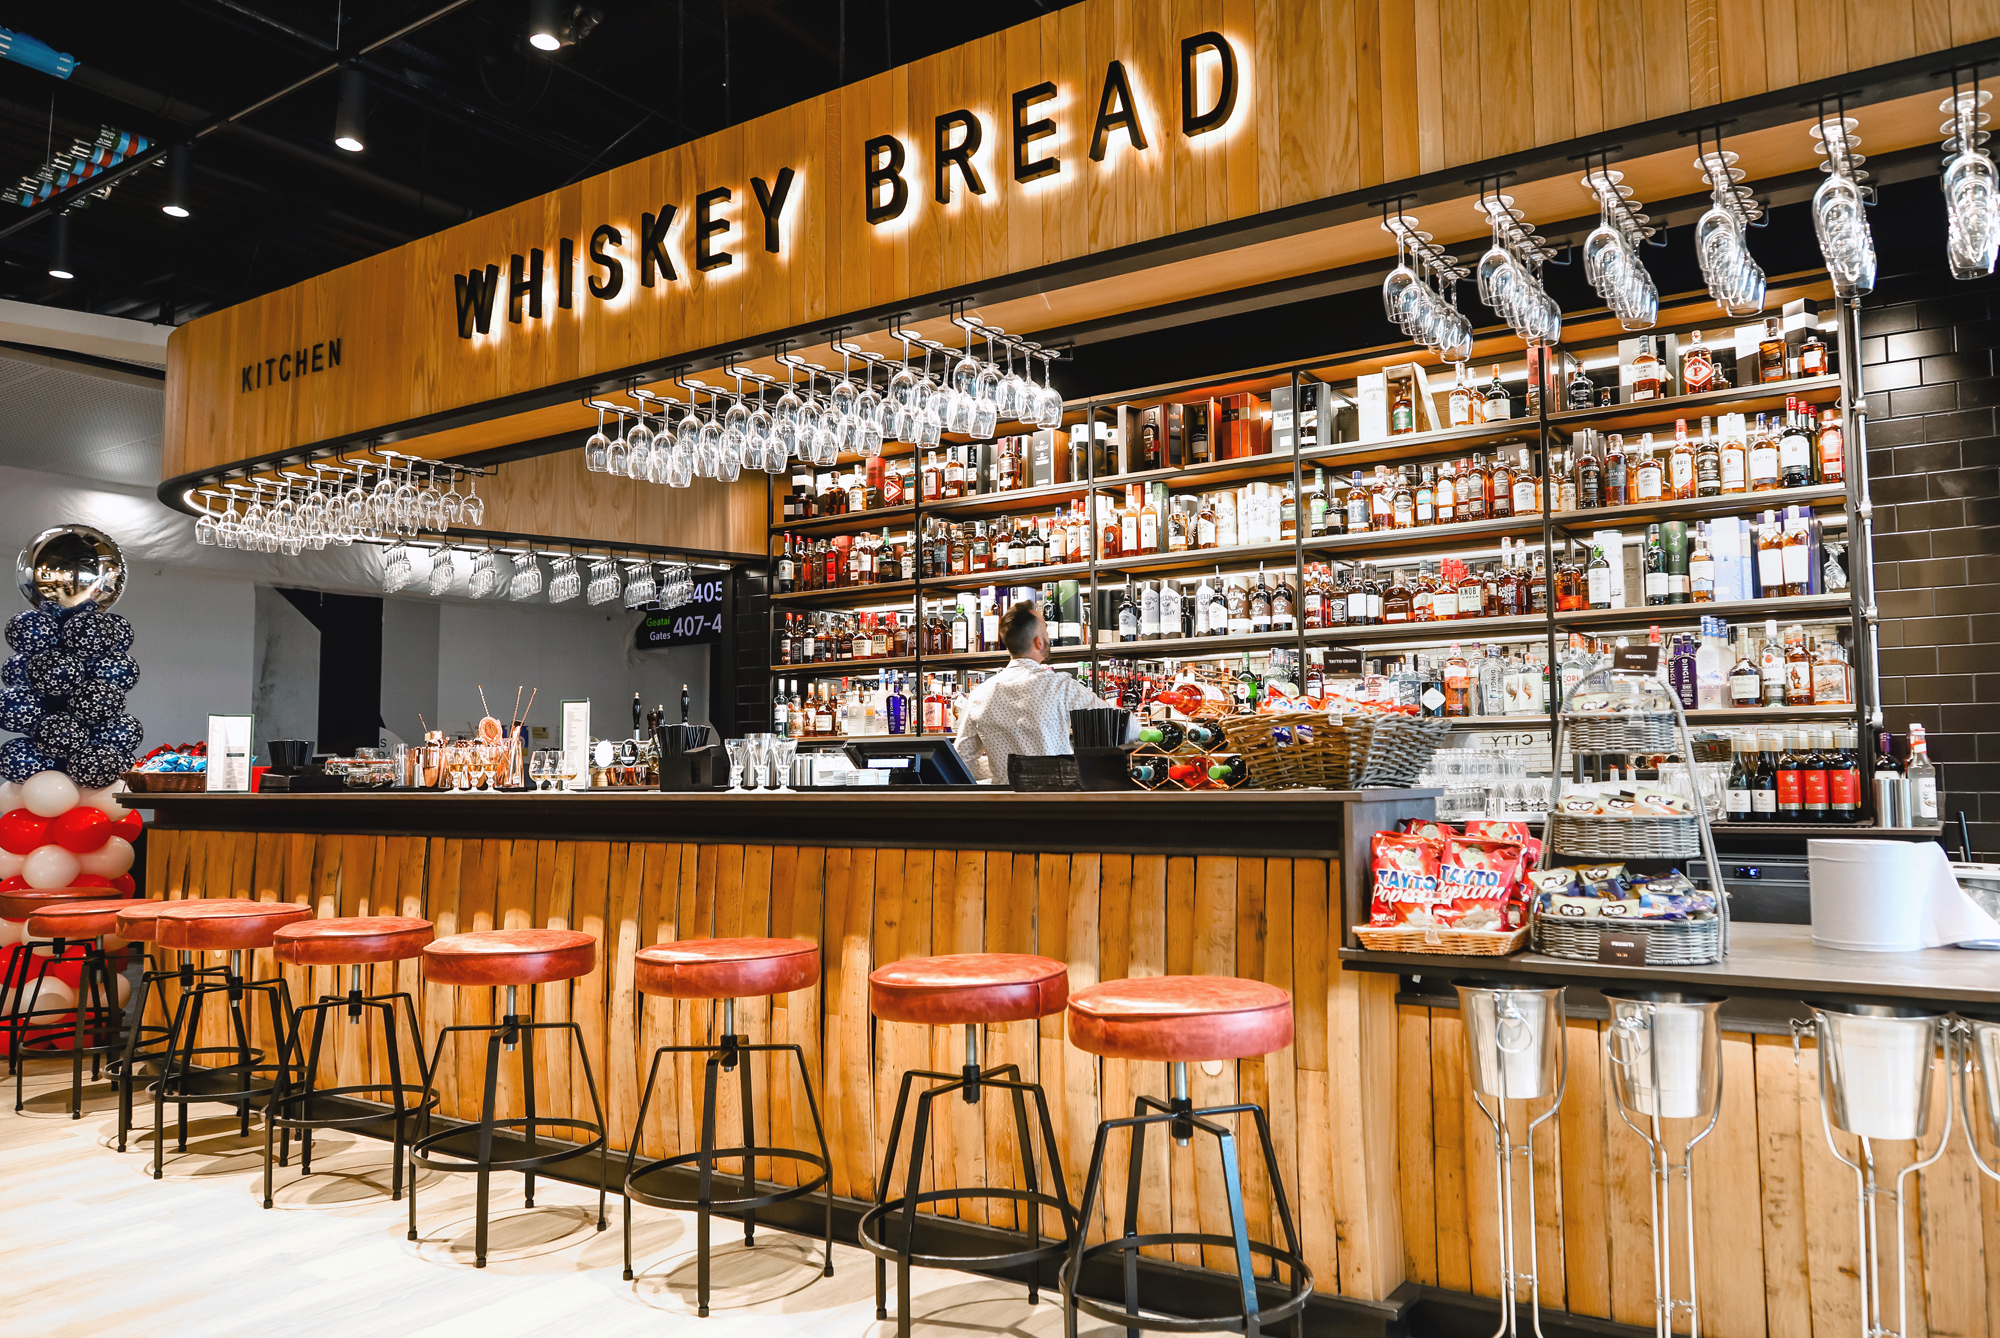 SSP opens Whiskey Bread at Dublin Airport